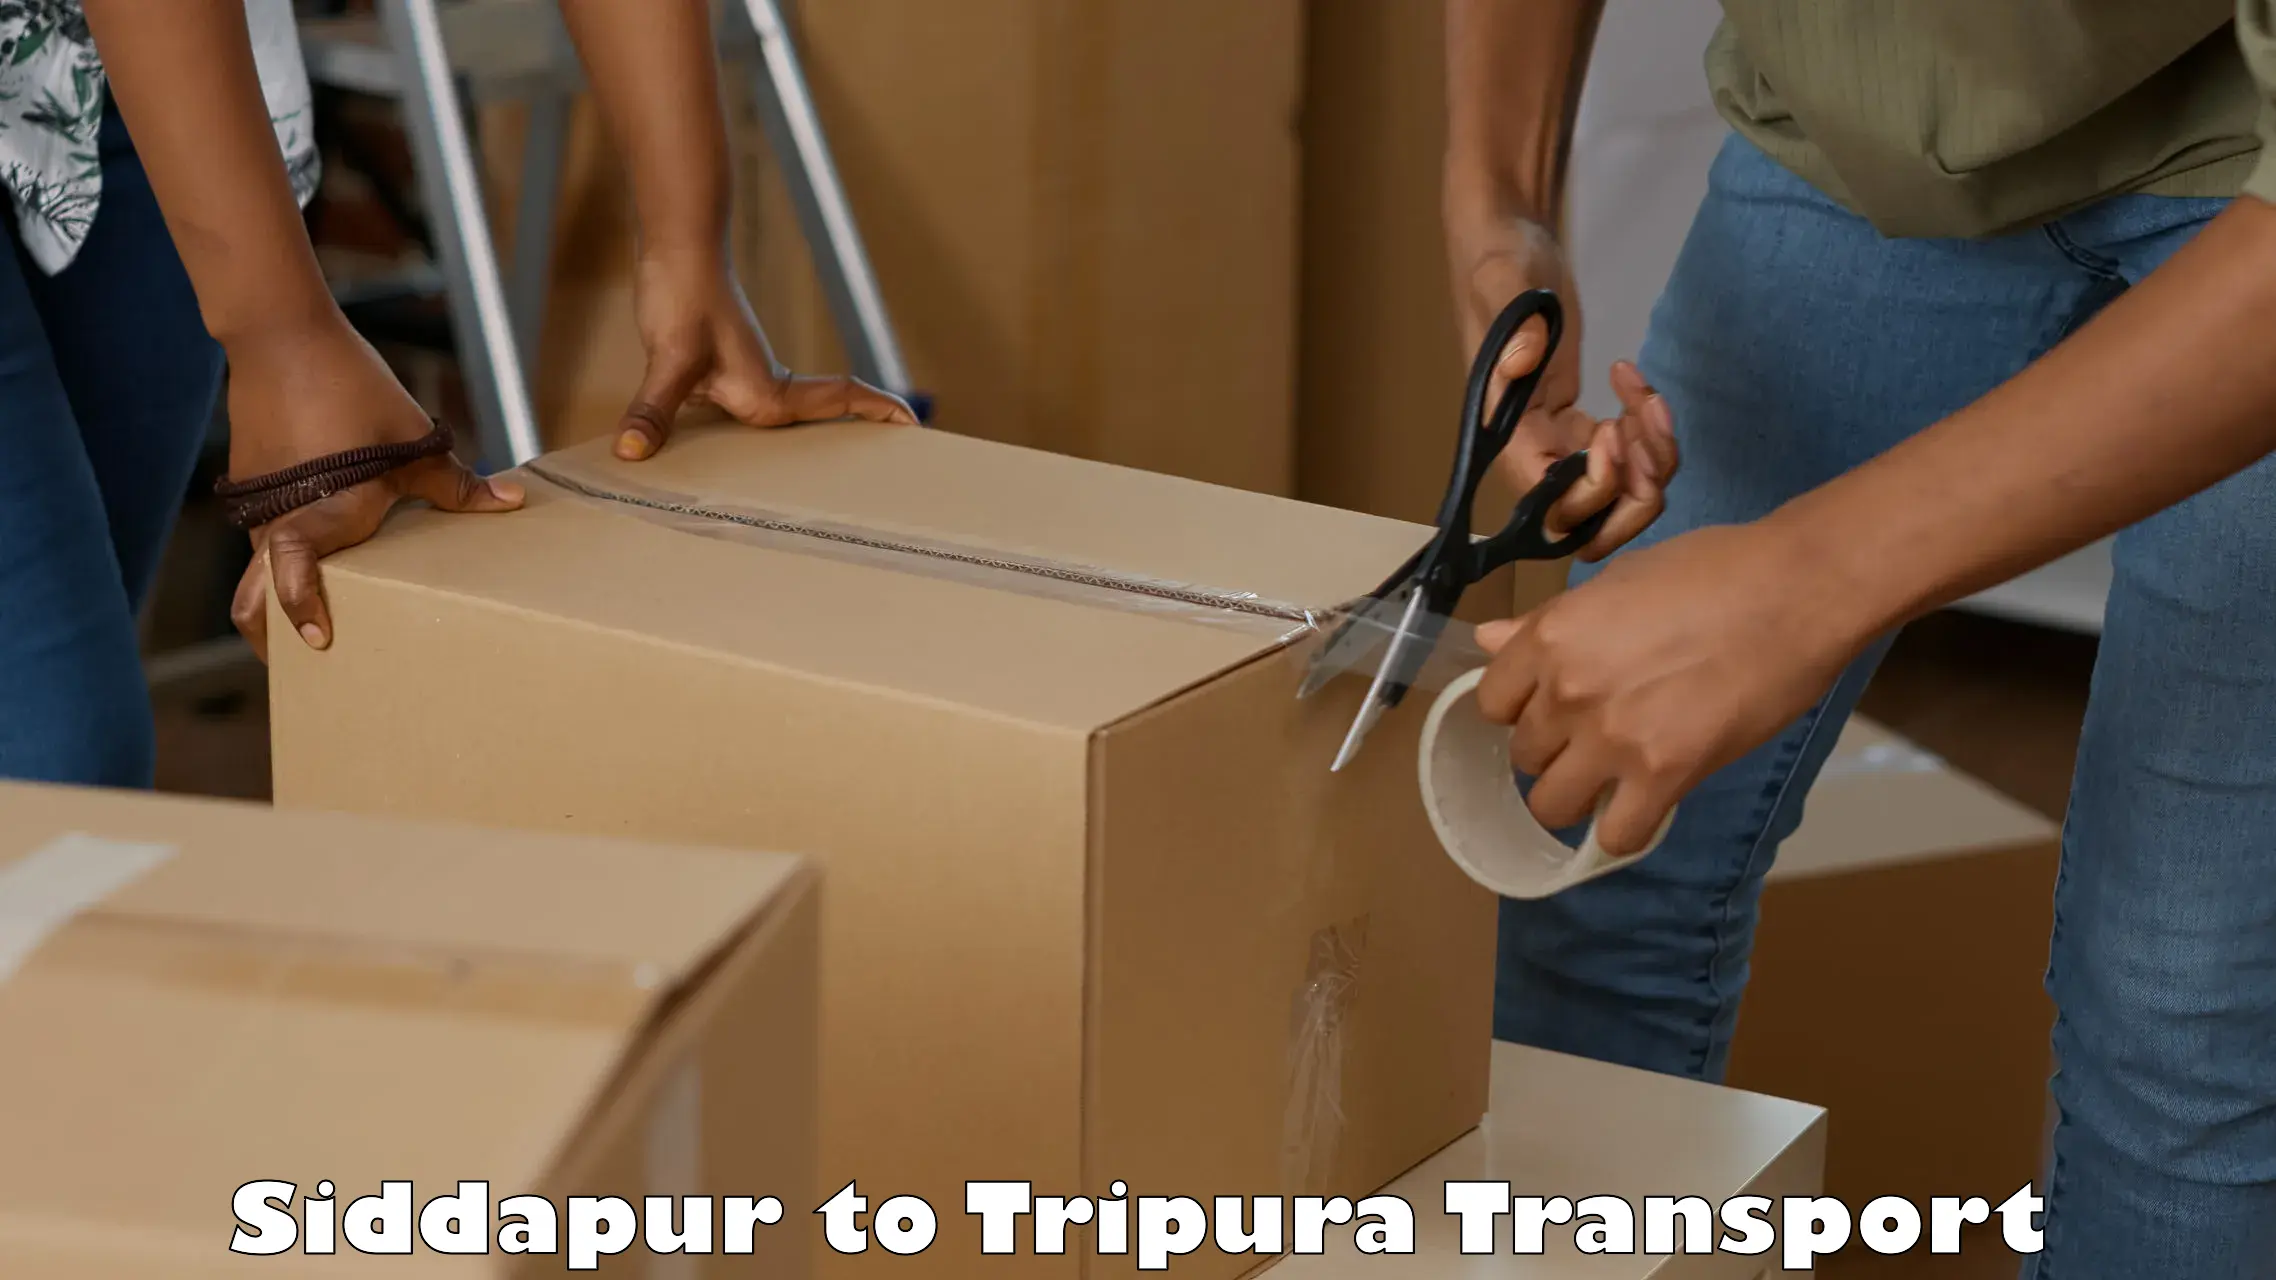 Commercial transport service Siddapur to South Tripura